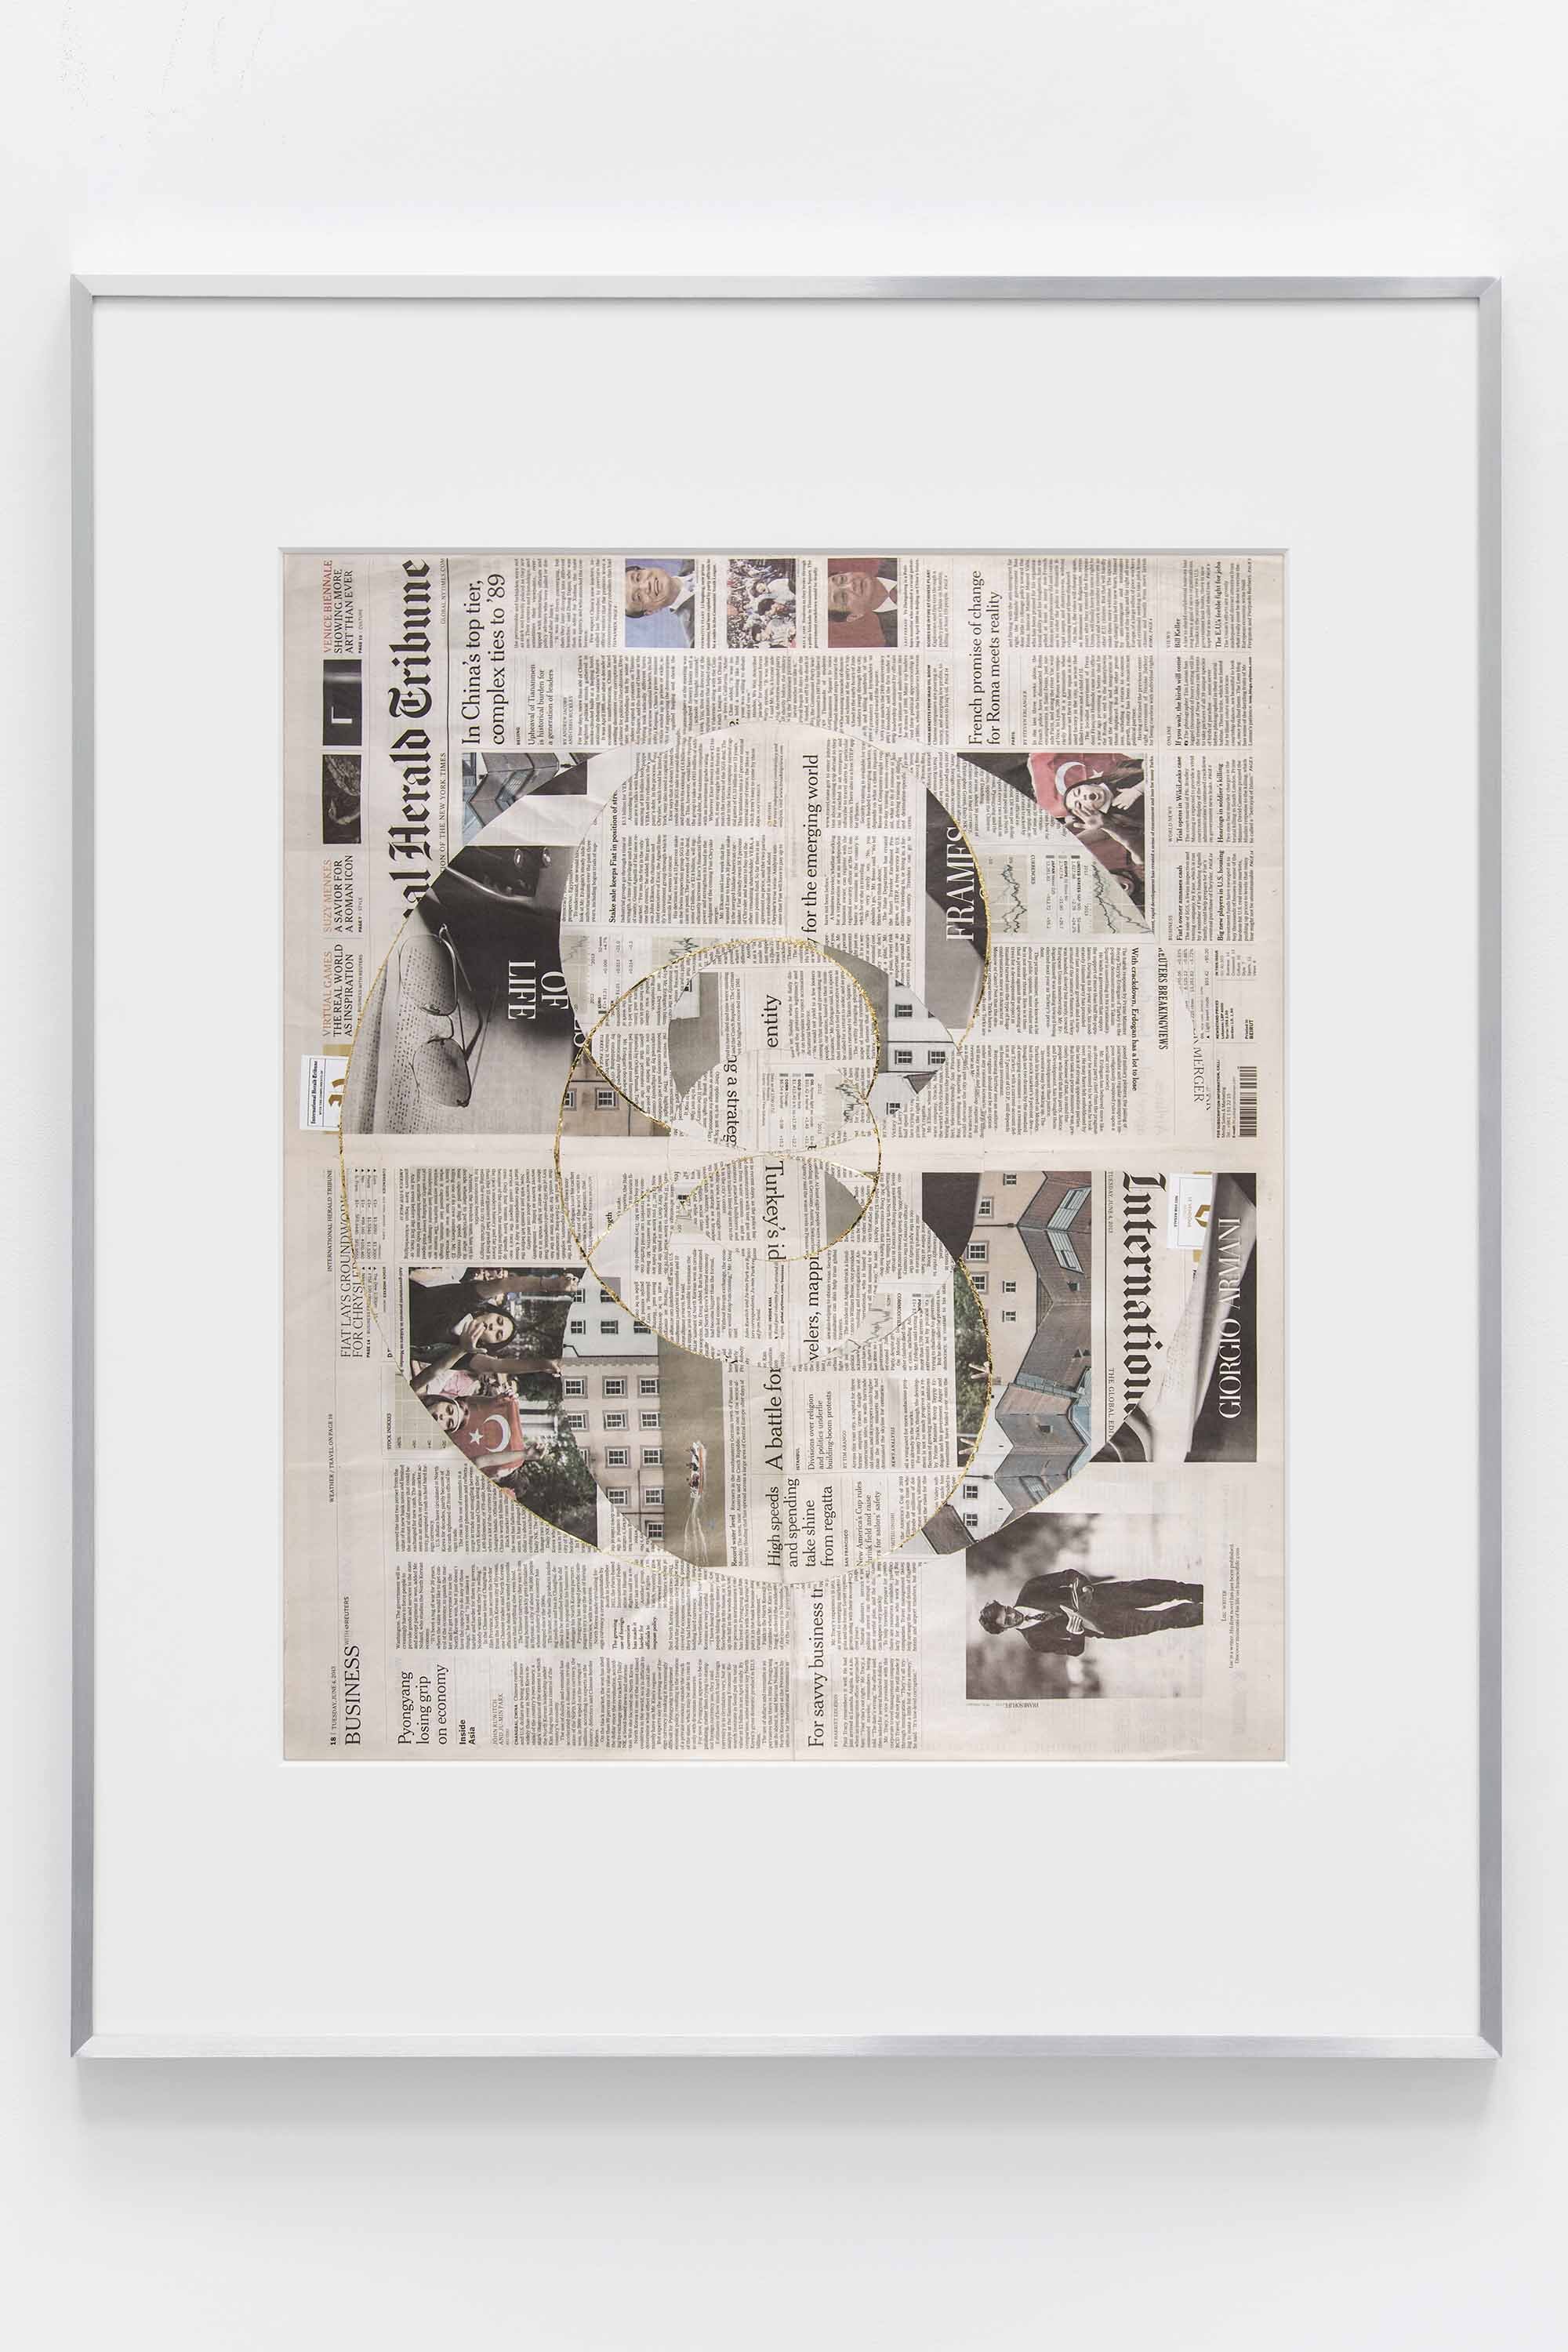   Blind Collage (Seven 180º Rotations, International Herald Tribune: Beirut, Lebanon, Tuesday, June 4, 2013)    2021   Newspaper, tape, and 22 karat gold leaf  39 1/8 x 31 1/4 inches   Blind Collages, 2017–  